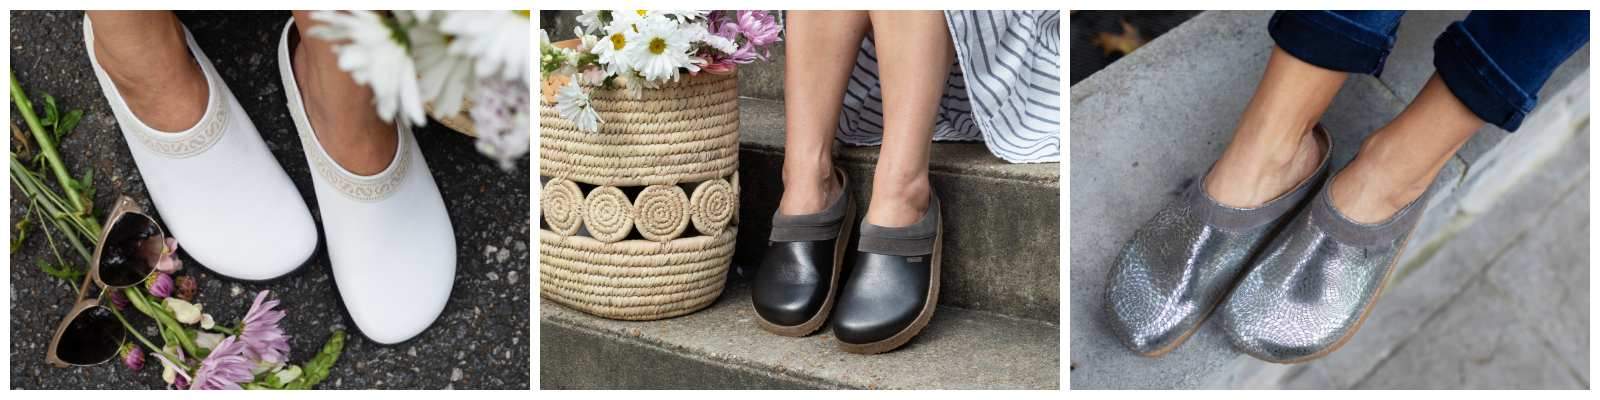 Reasons Why Clogs Are the Perfect Summer Shoes – Stegmann Clogs